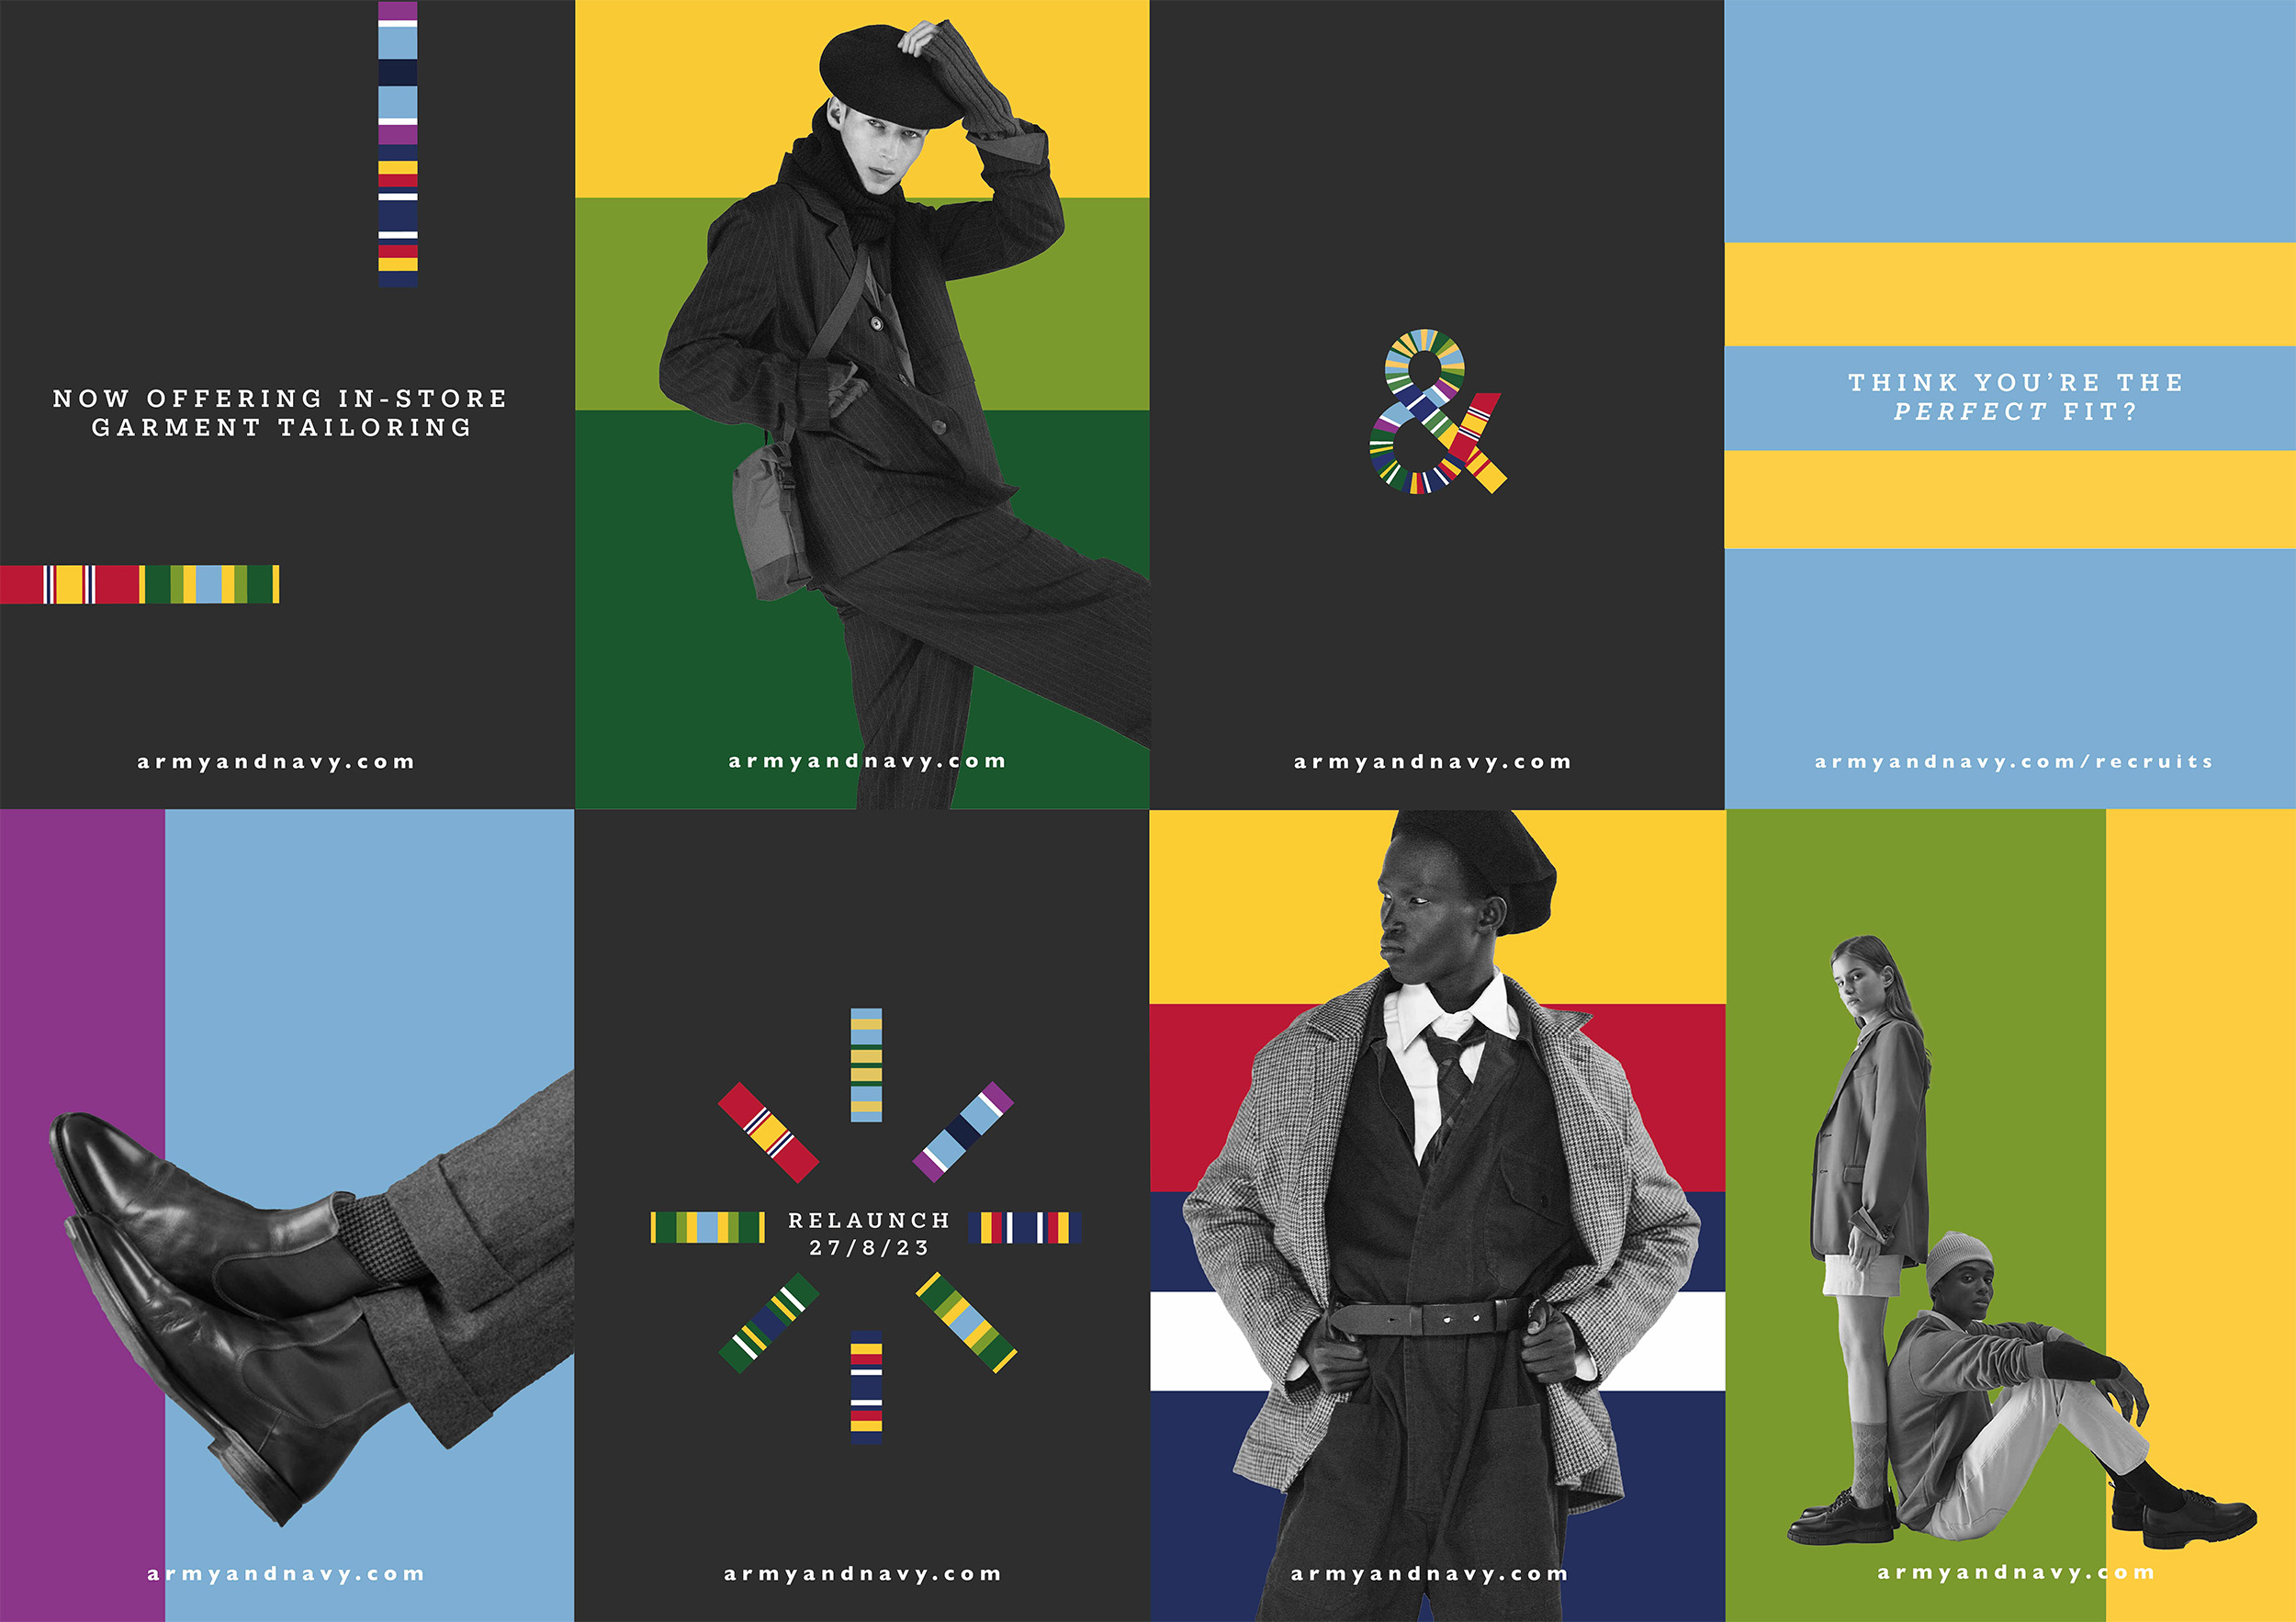 The identity takes inspiration from the colourful ribbons found on military uniform.